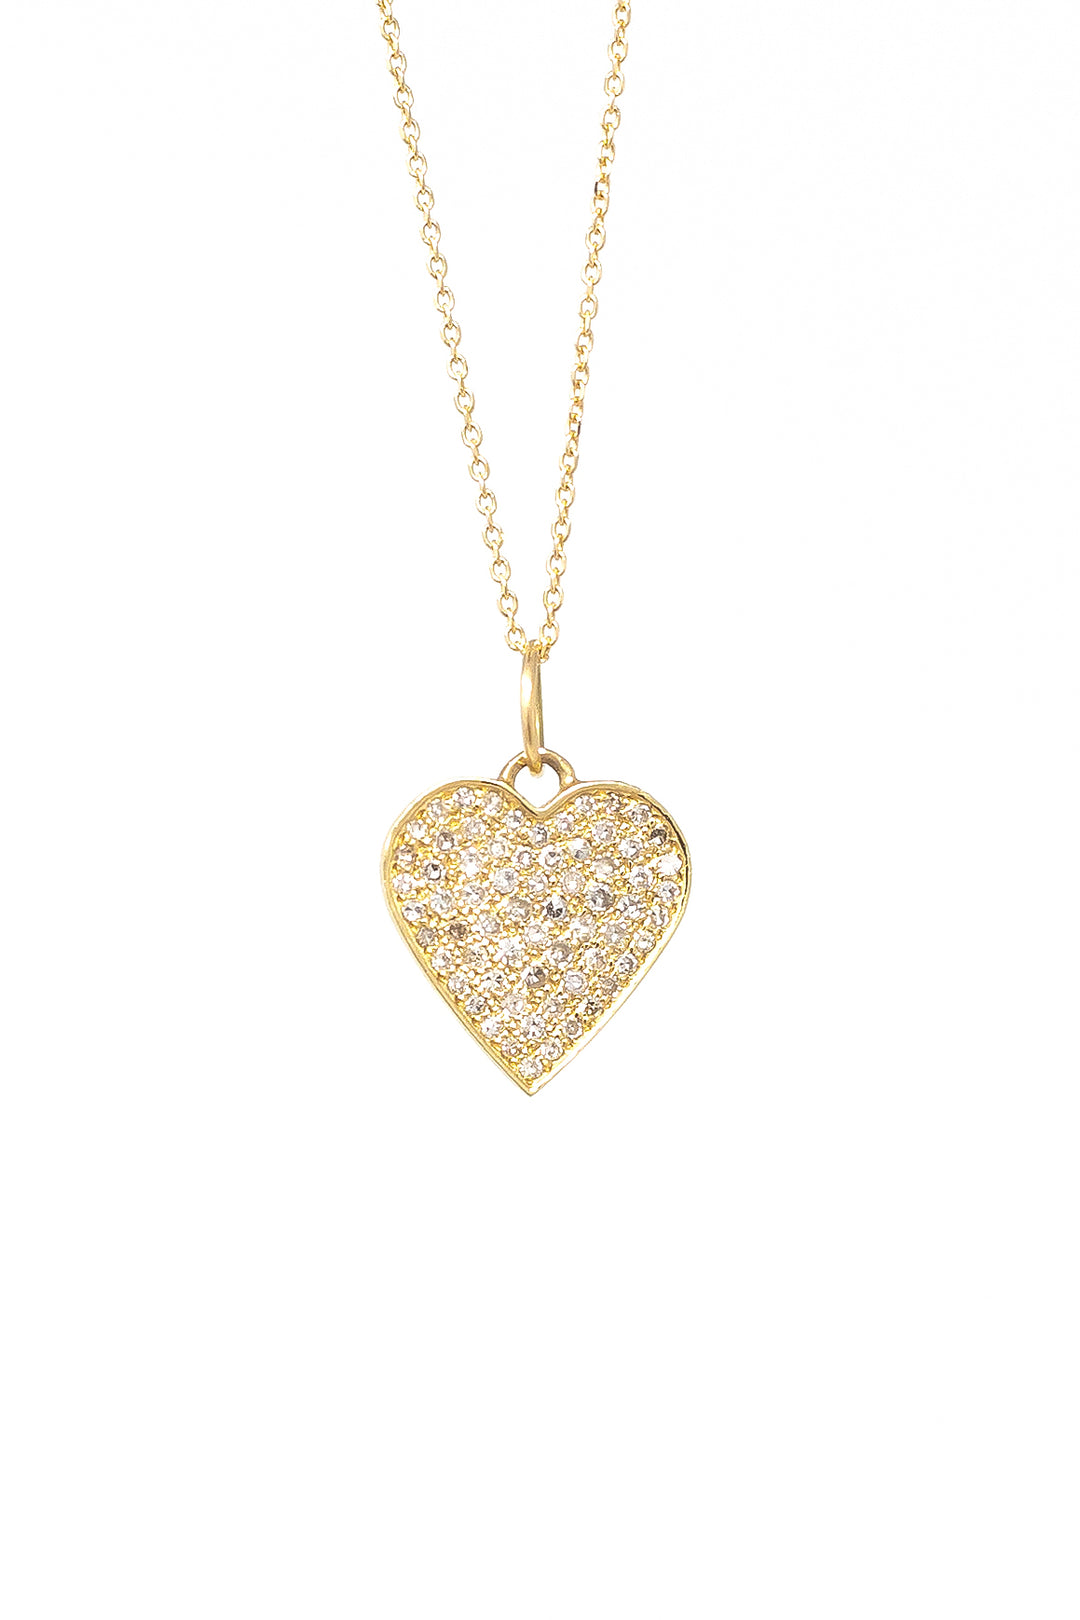 14K LG HEART NECKLACE - Kingfisher Road - Online Boutique